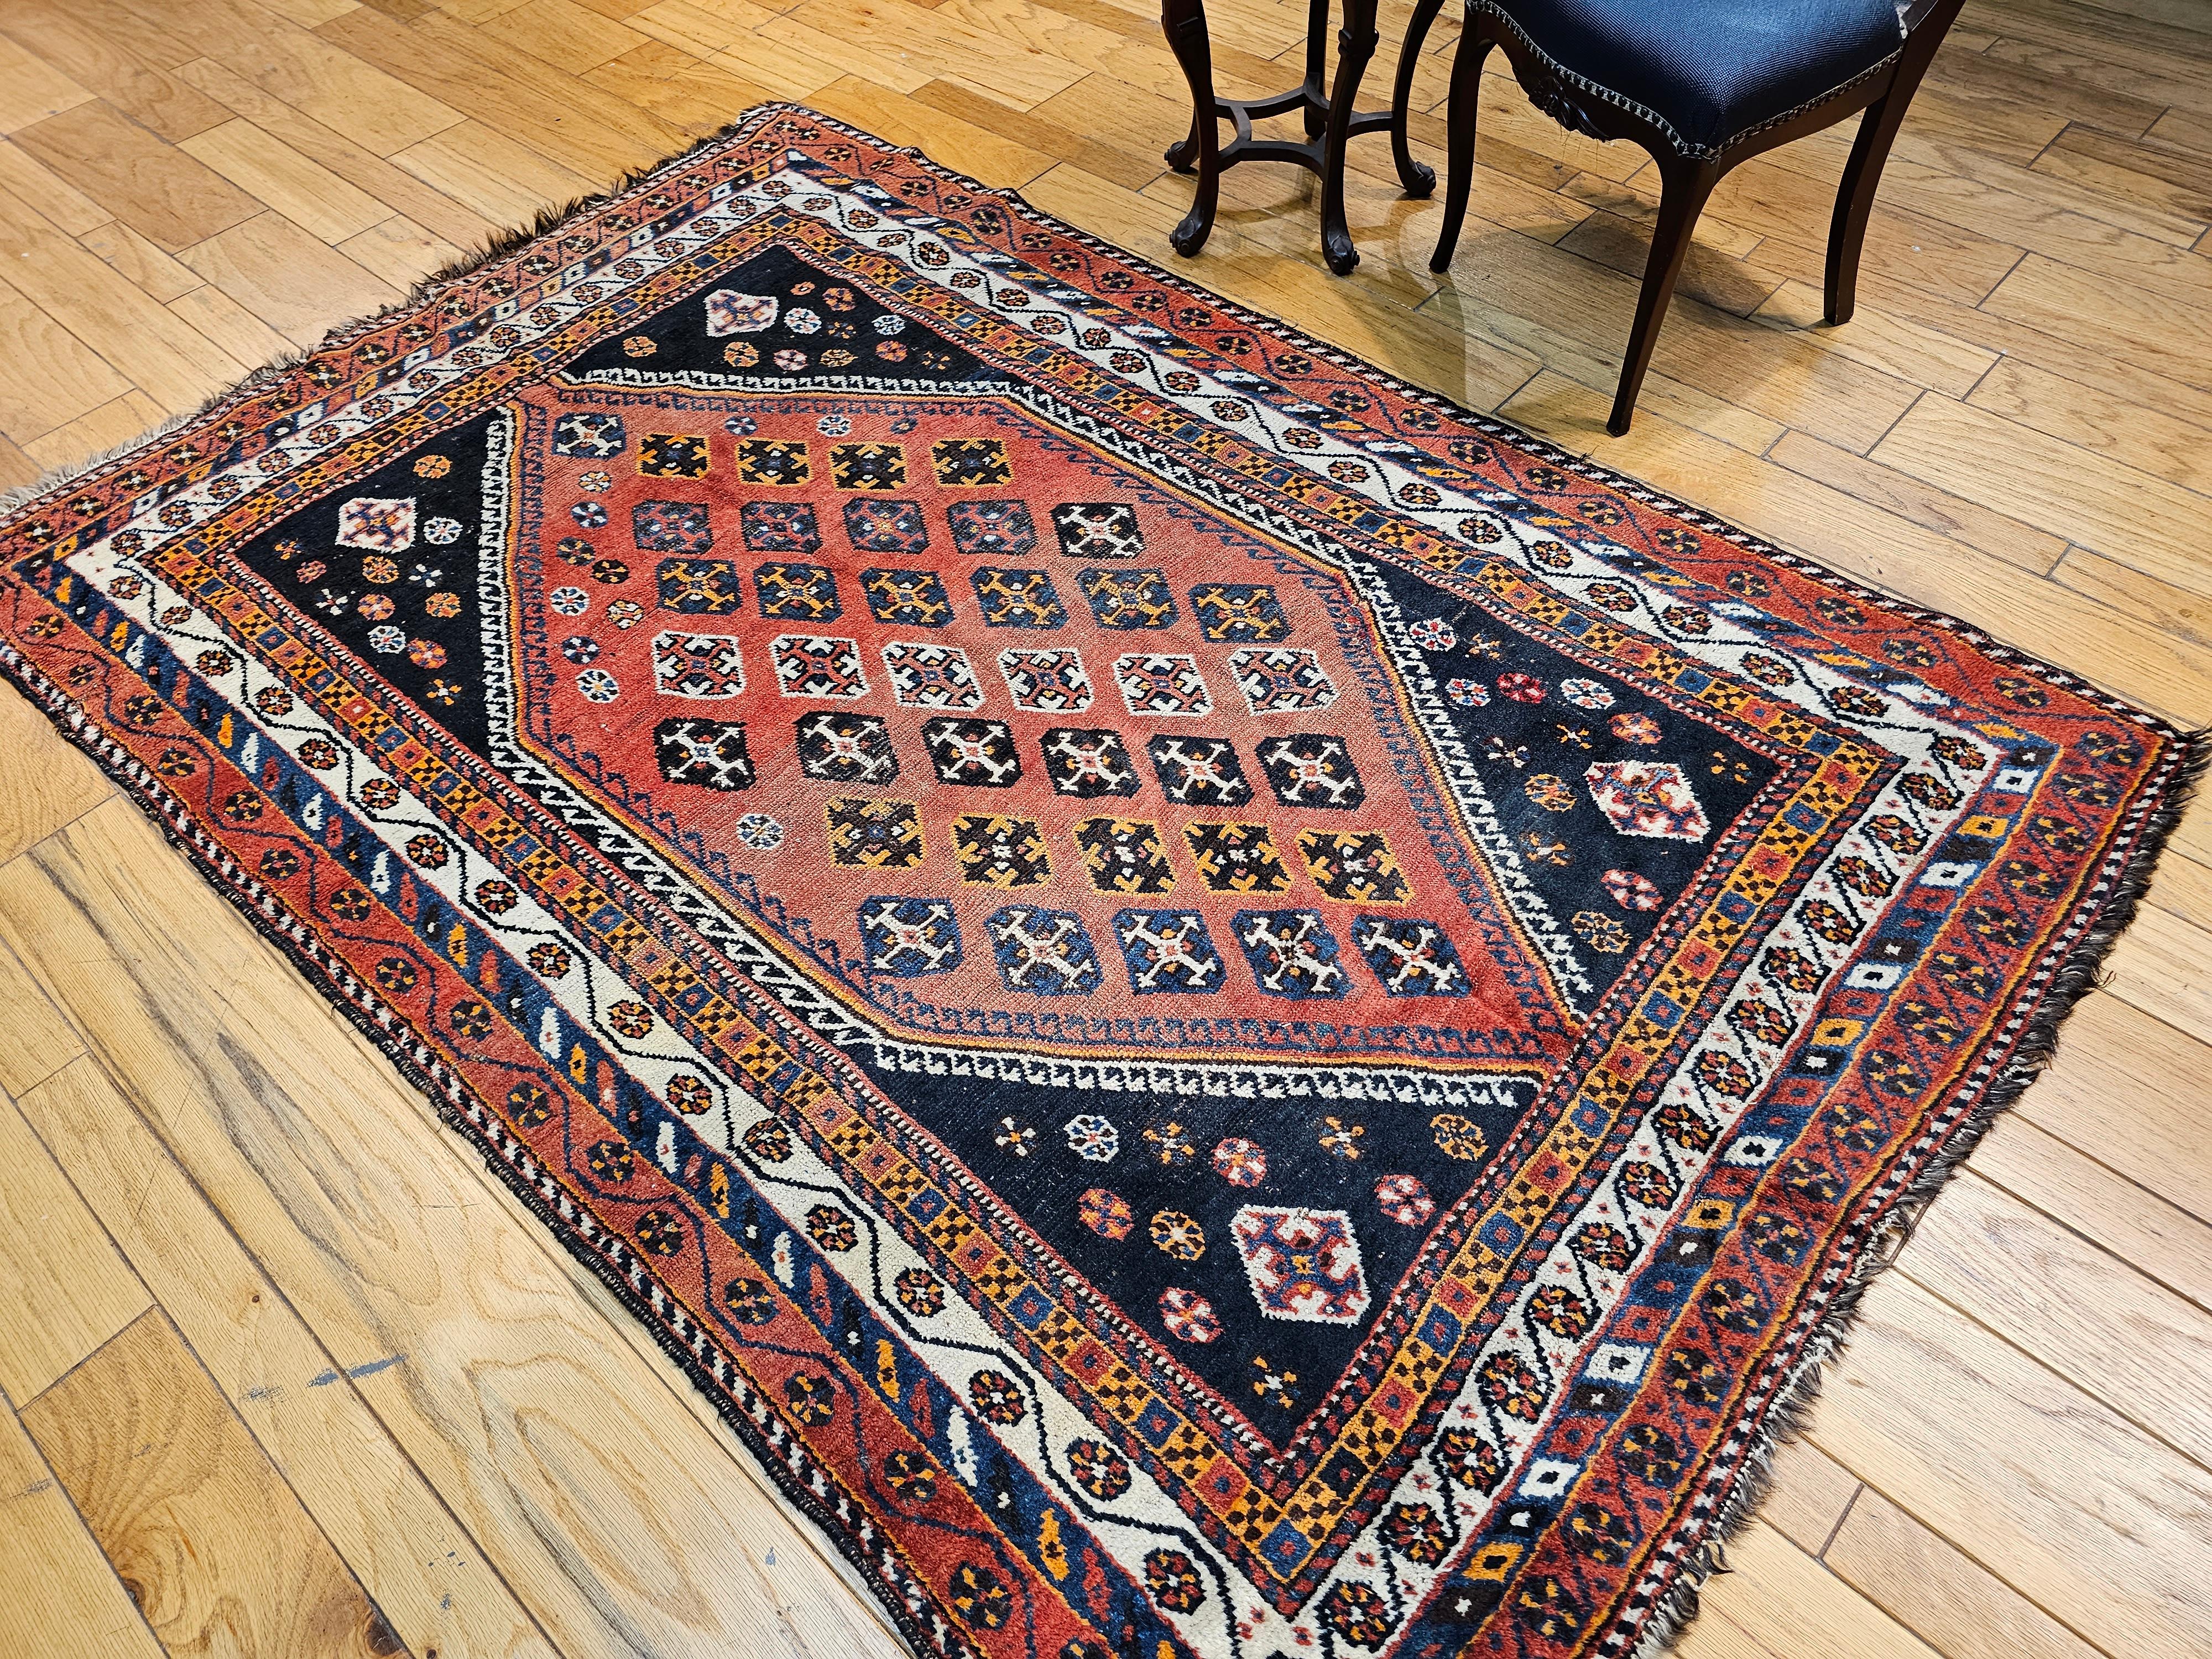 Vintage Persian Qashqai Tribal Area Rug in Rust, Ivory, Blue, Yellow, Black For Sale 7